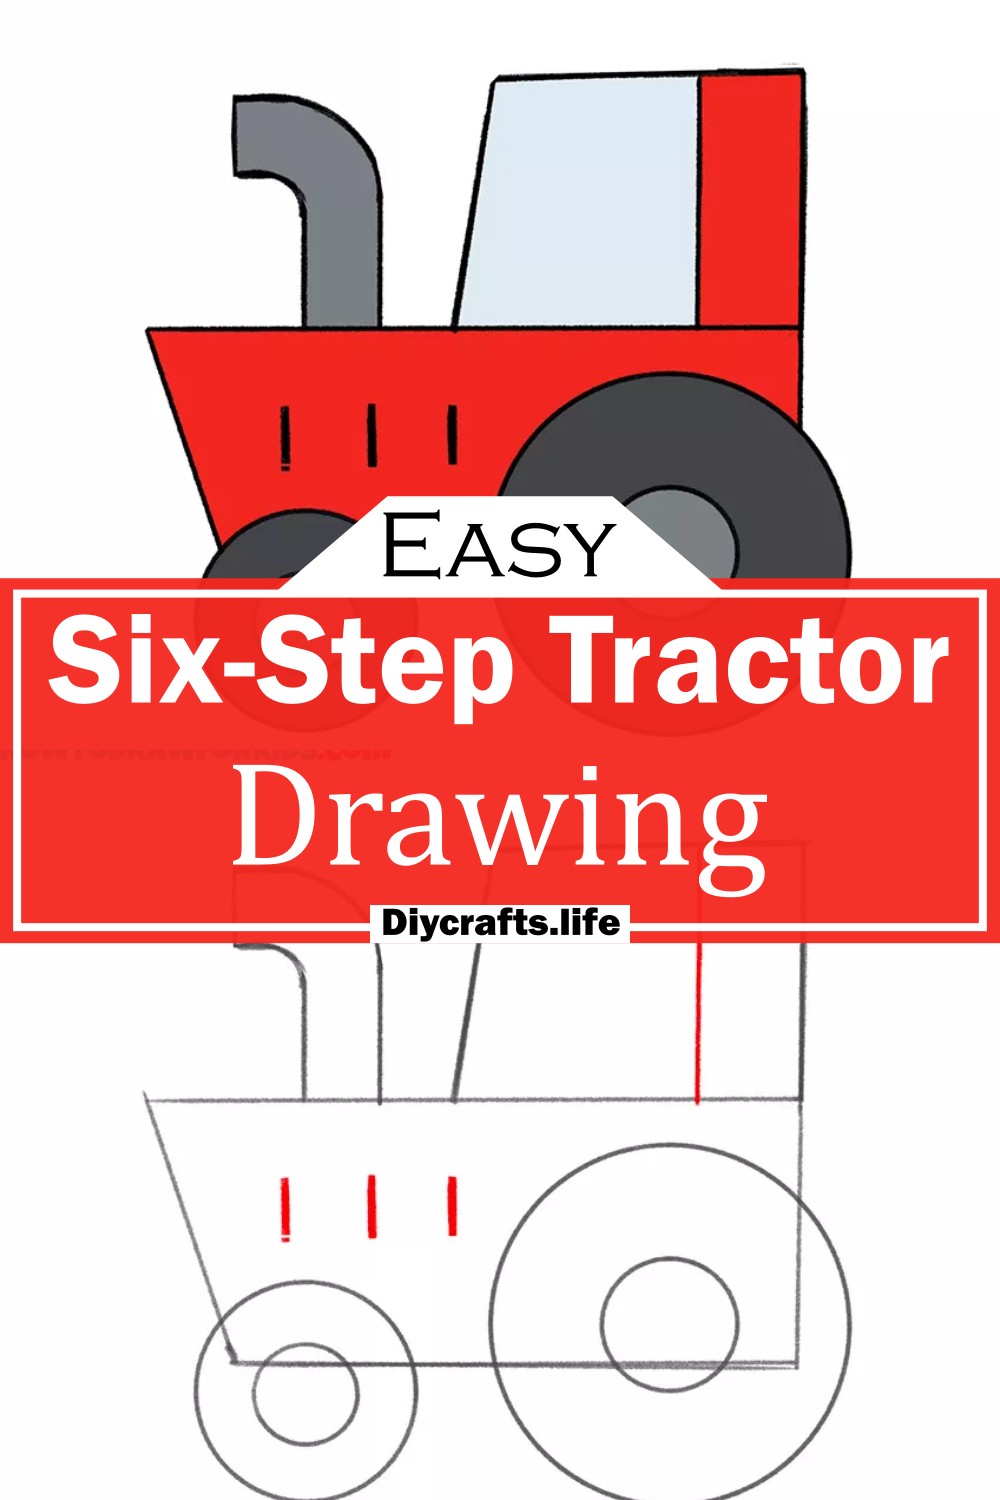 Six-Step Tractor Drawing